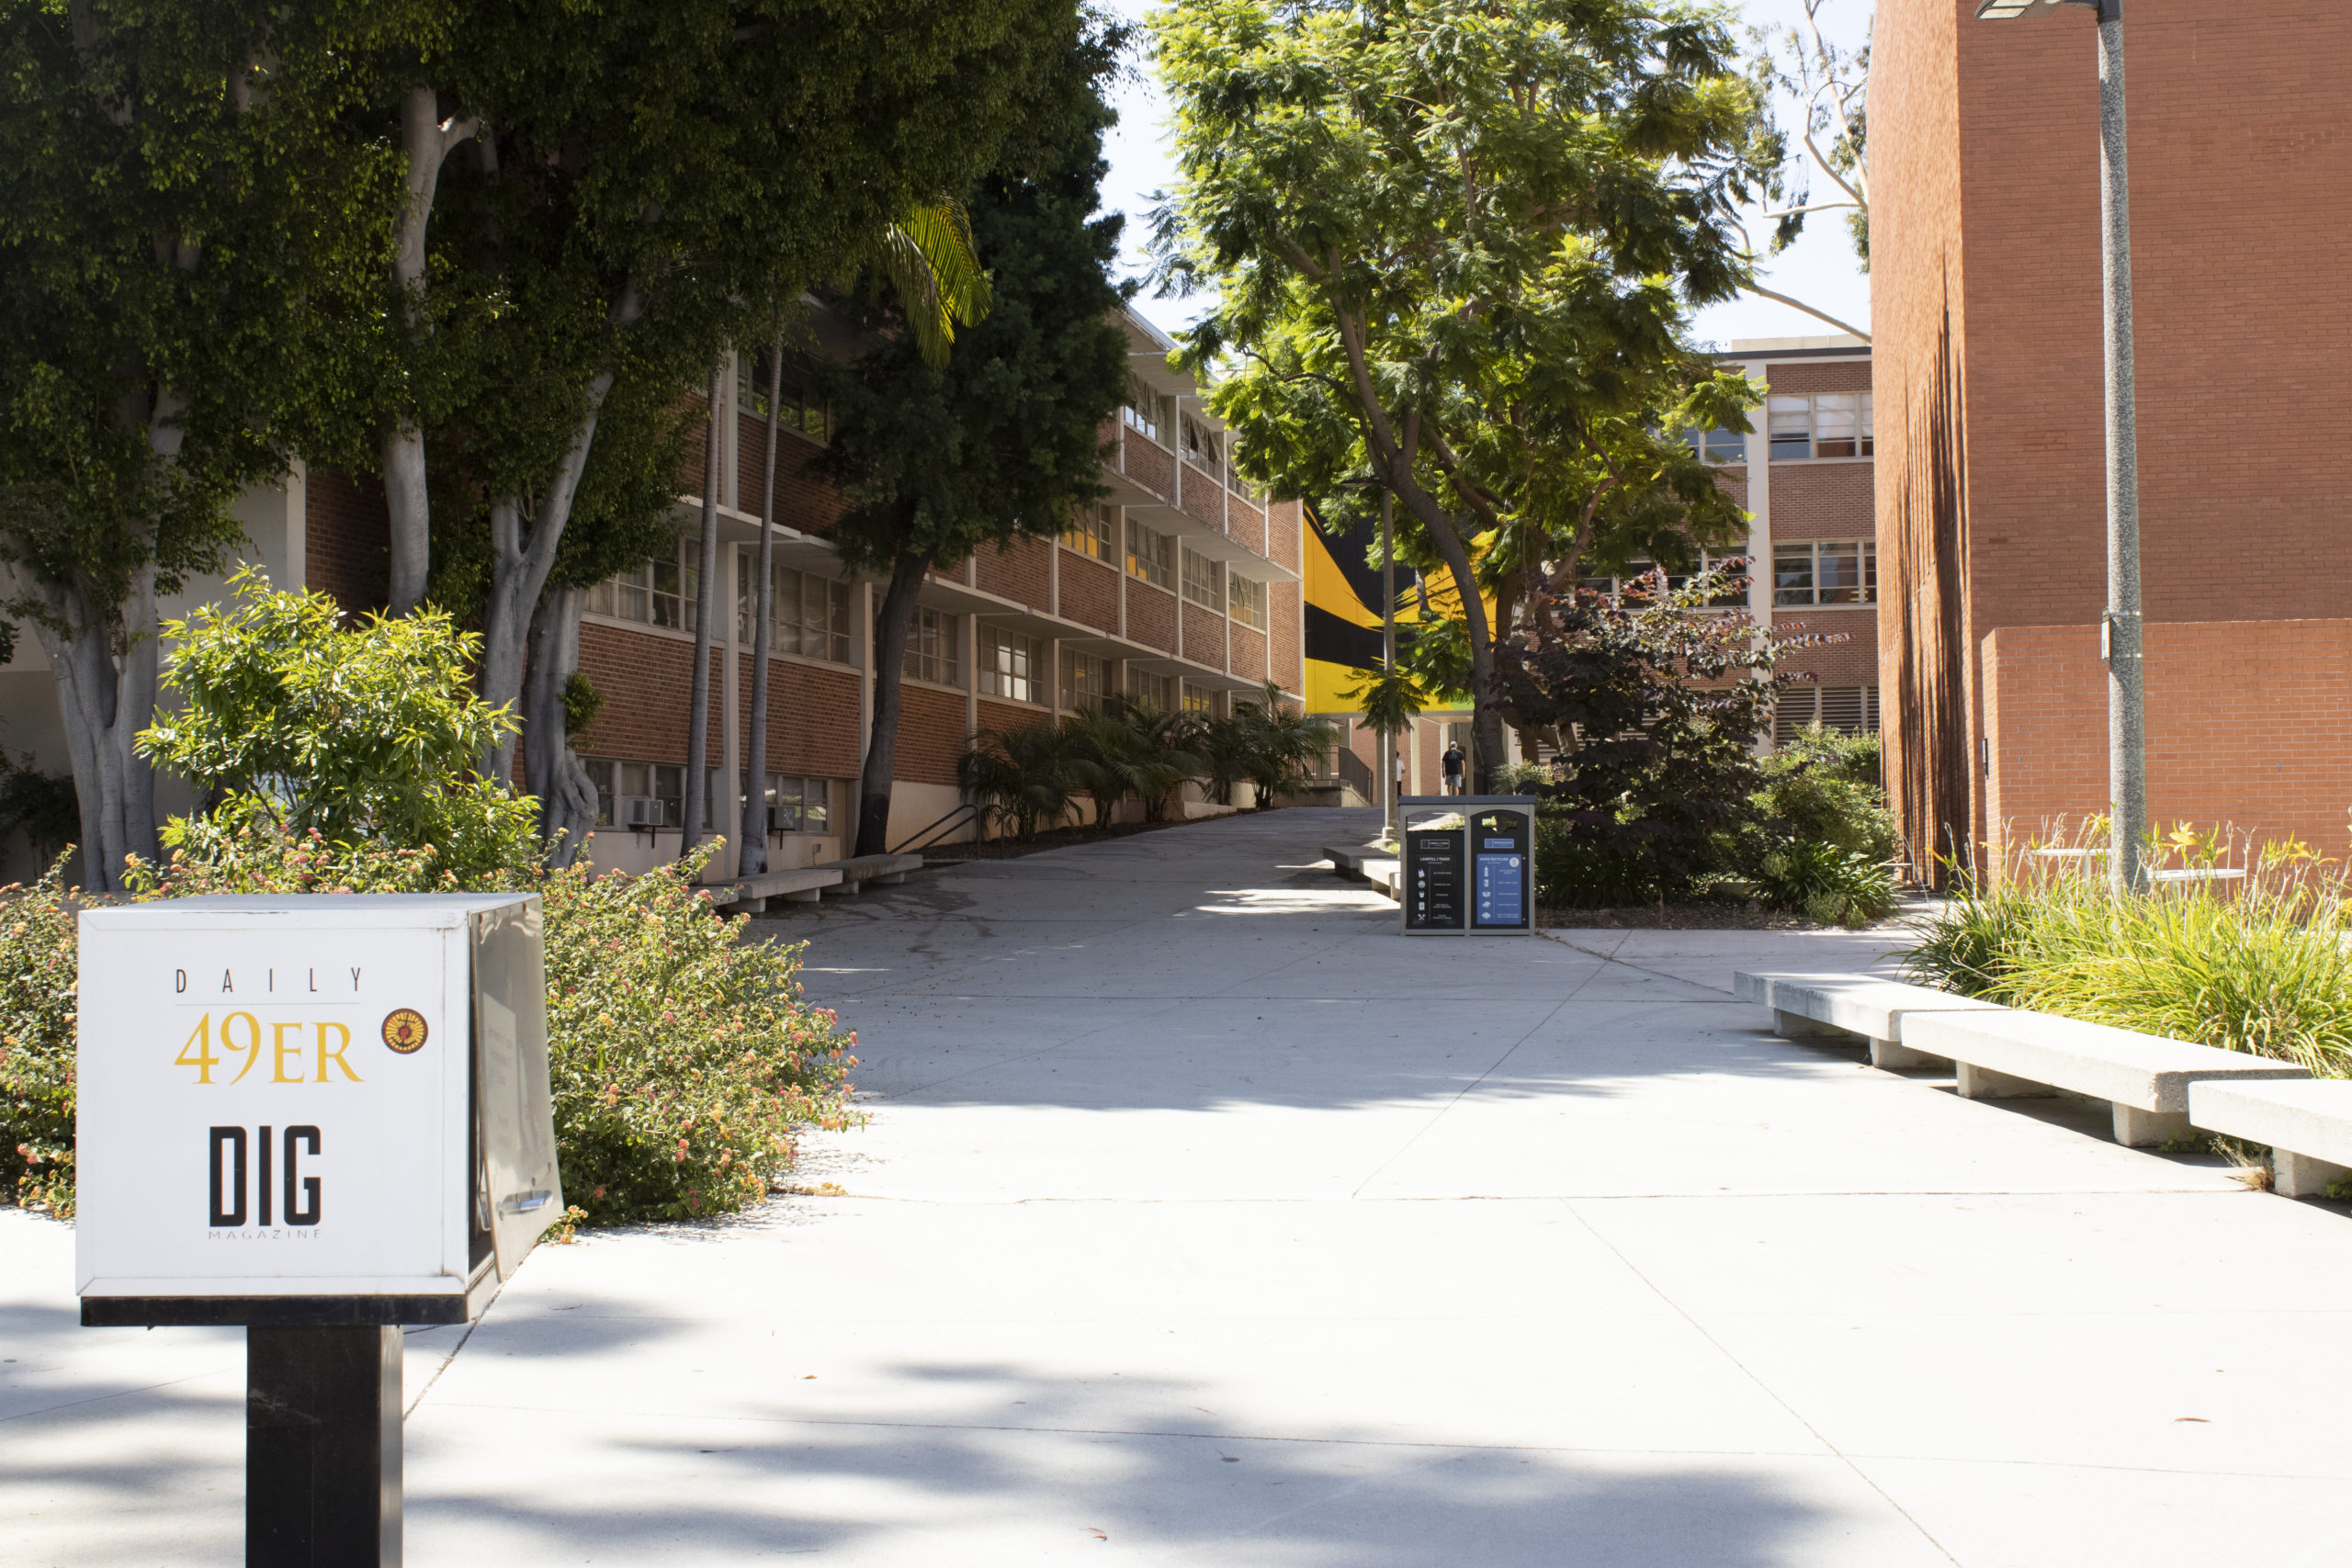 BREAKING CSULB to see 47 of courses inperson for fall 2021